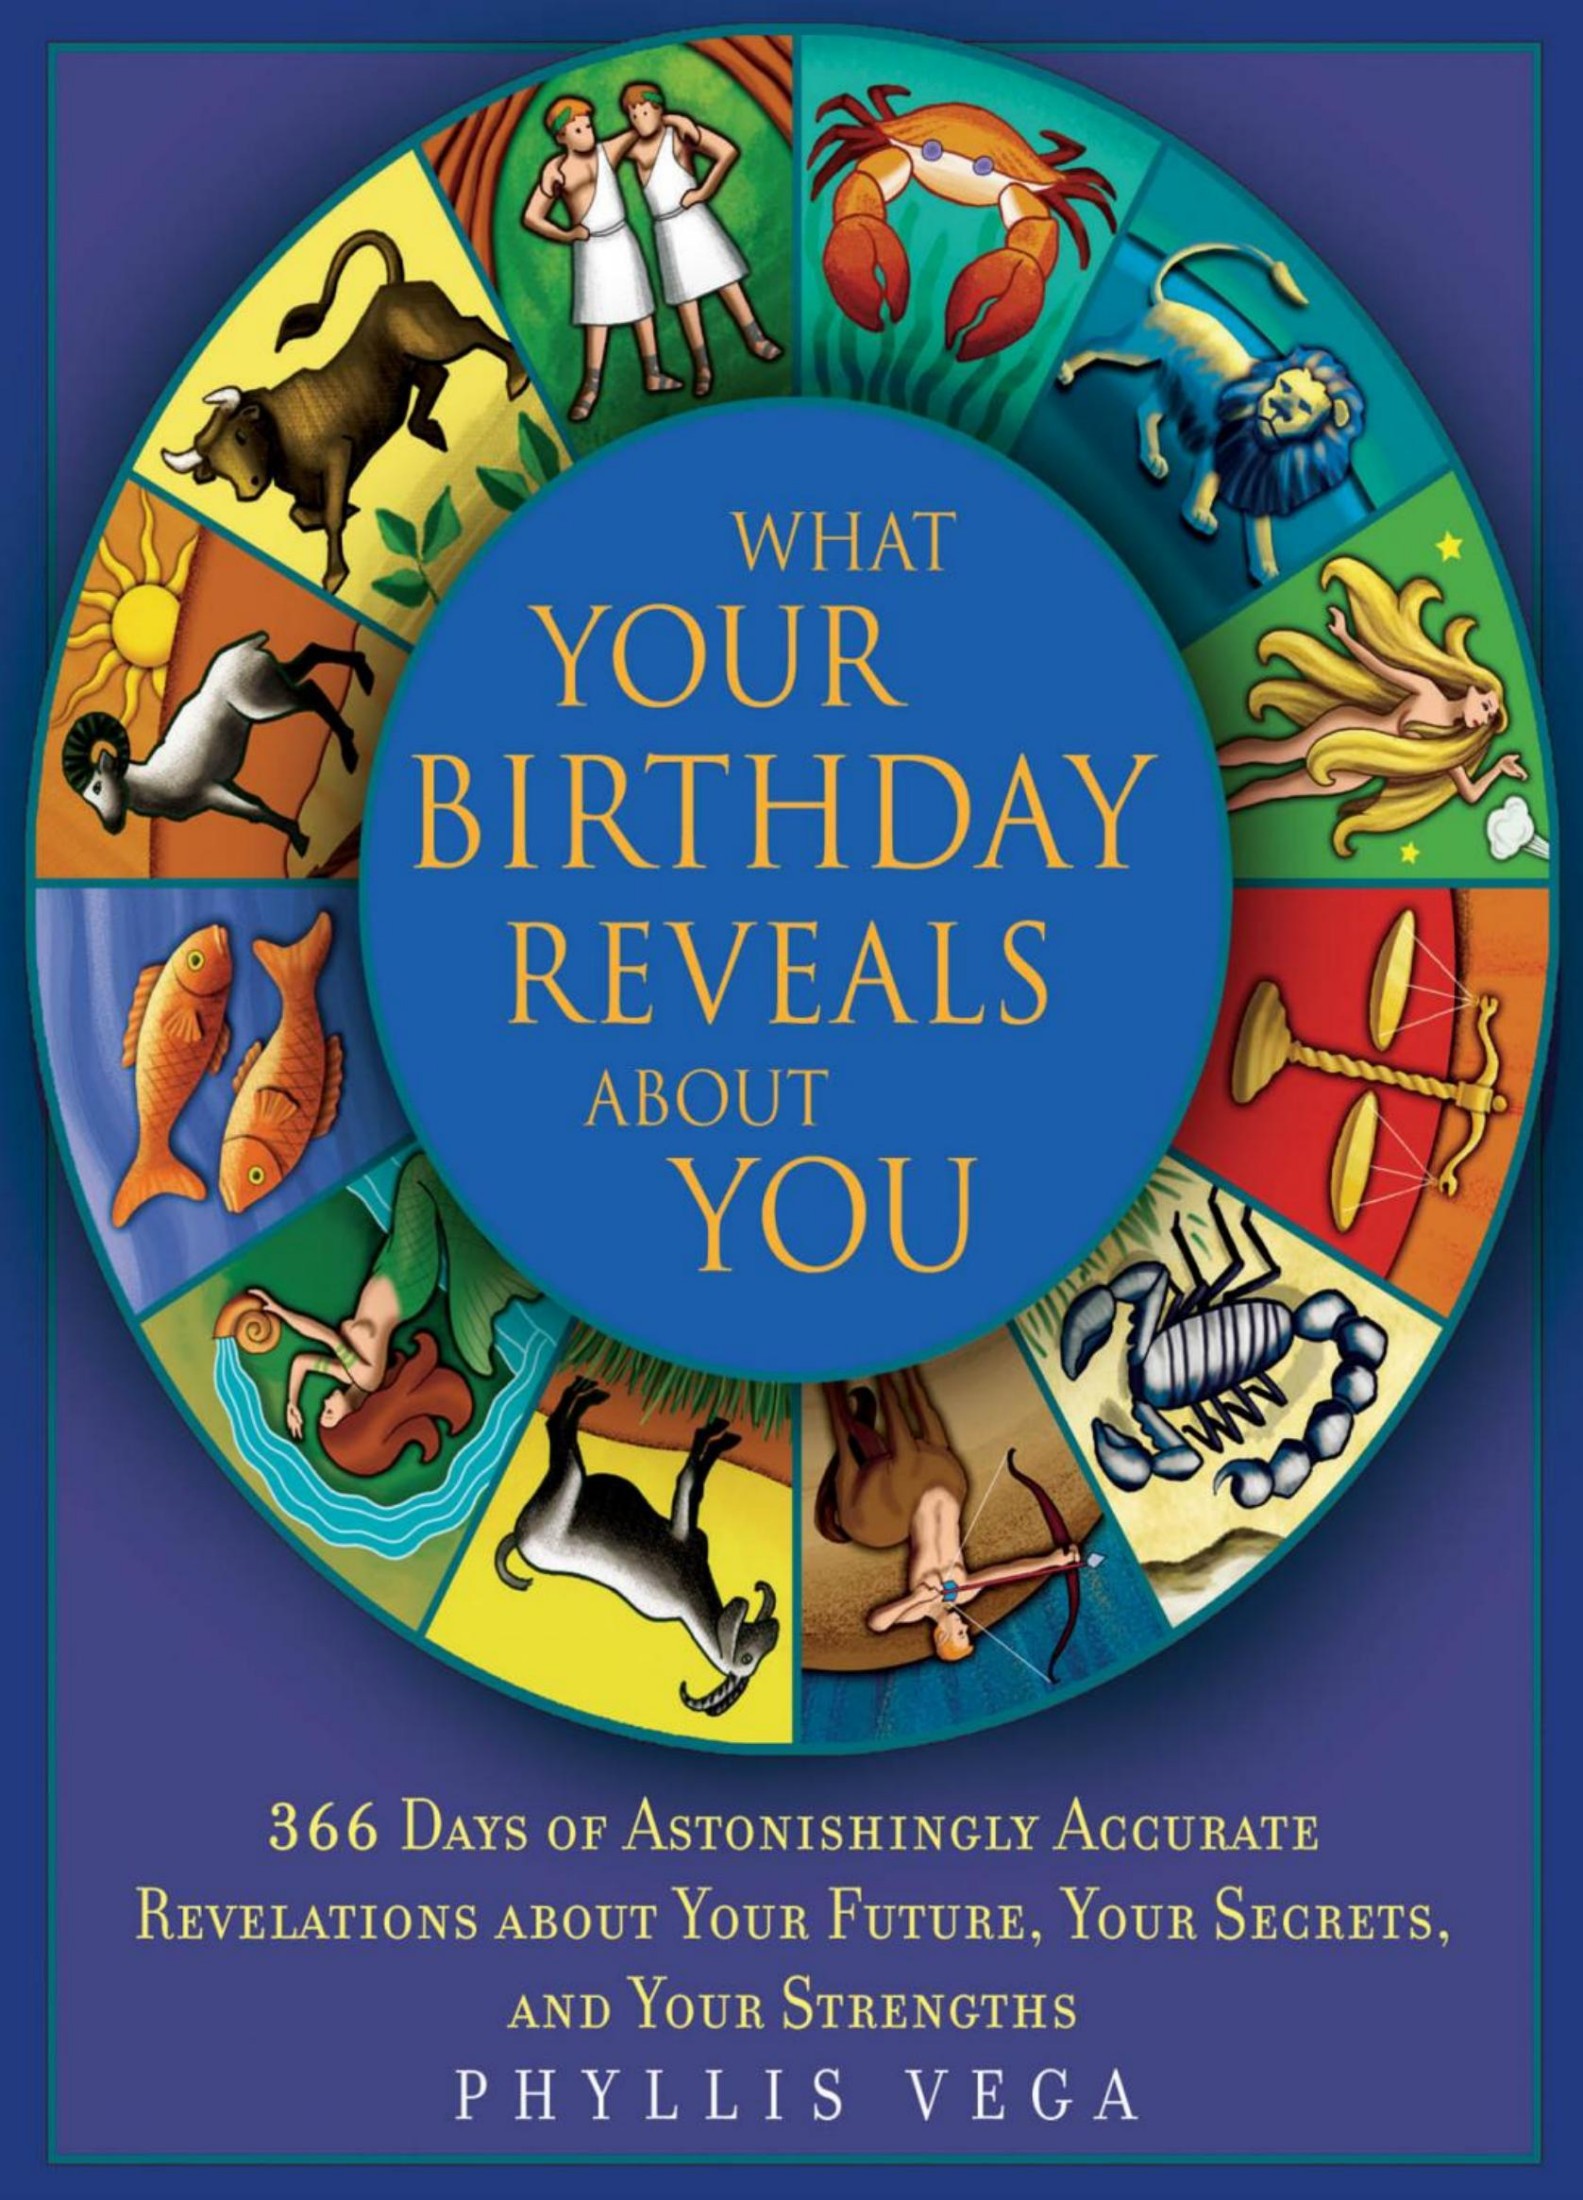 What Your Birthday Reveals About You: 365 Days of Astonishingly Accurate Revelations About Your Future, Your Secrets, and Your Strengths